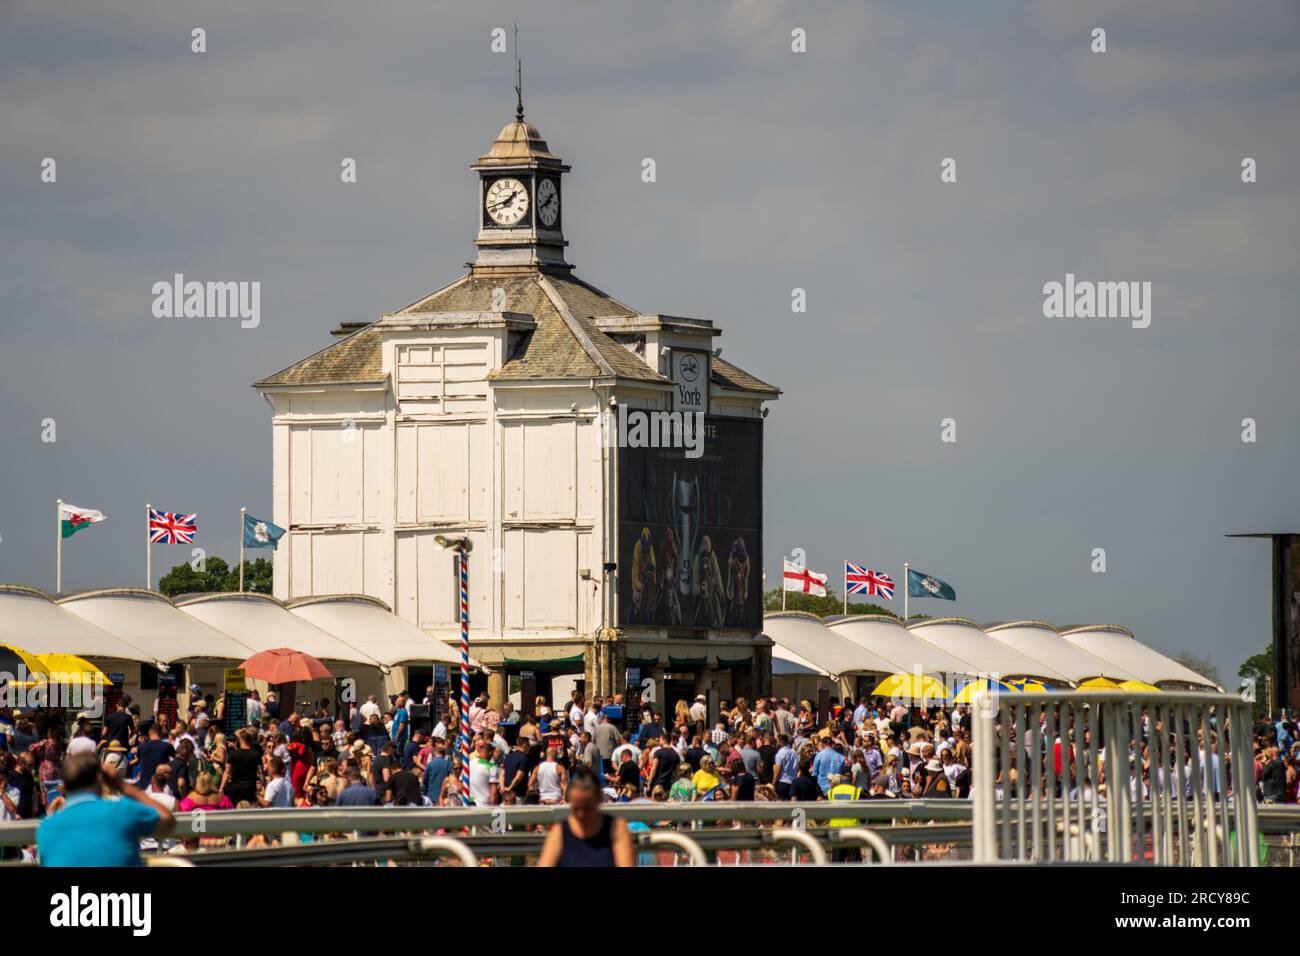 York Races. Crowds pack the Clocktower Enclosure at York Racecourse to enjoy the horse races, bet, picnic, eat, drink, laugh with friends and family. Stock Photo